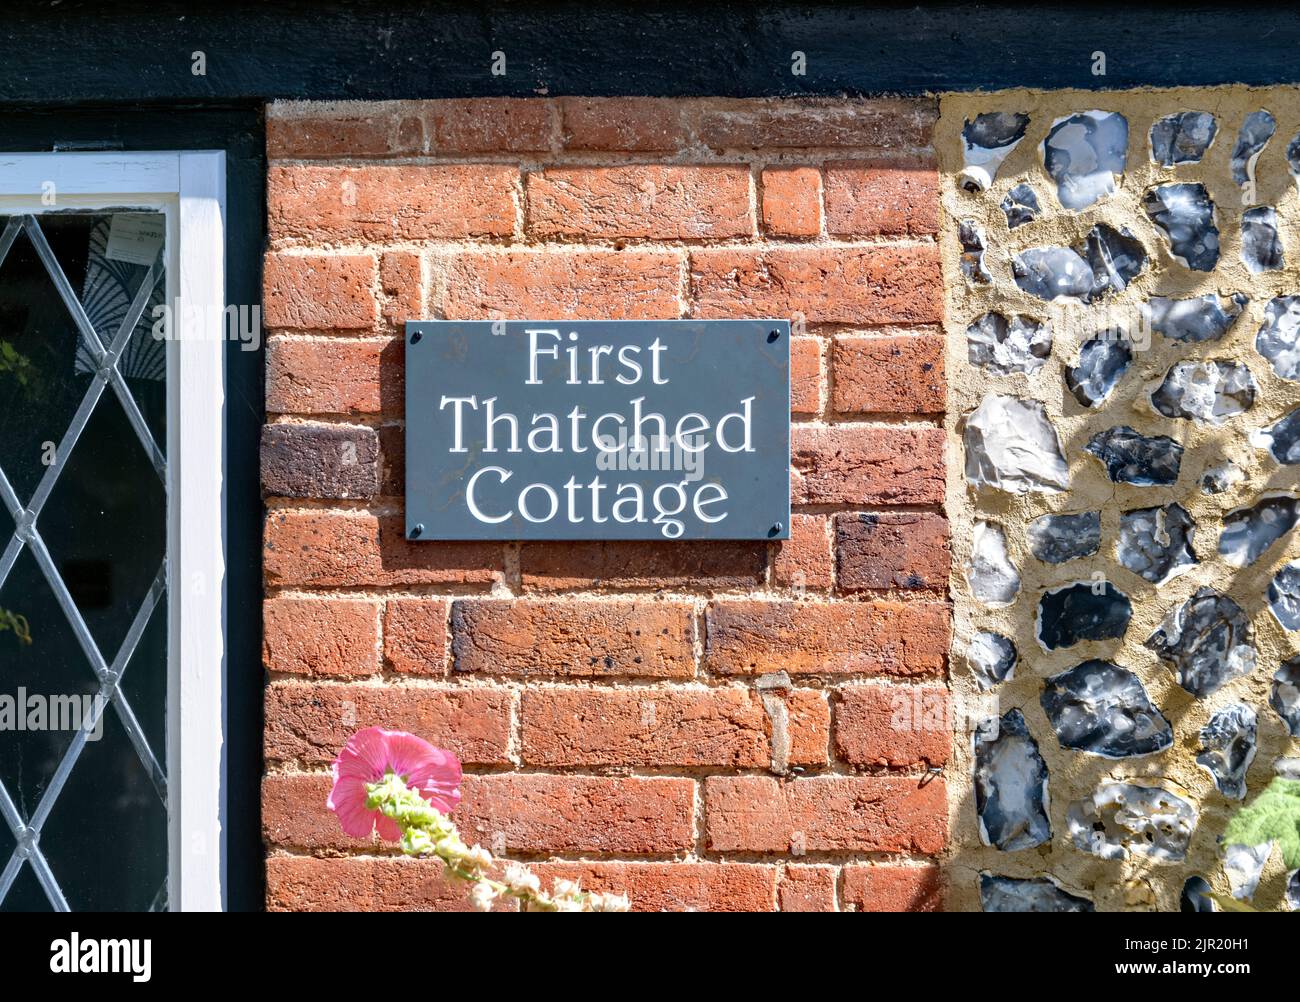 Sign for First Thatched Cottage on brick wall, Flamstead, Hertfordshire Stock Photo